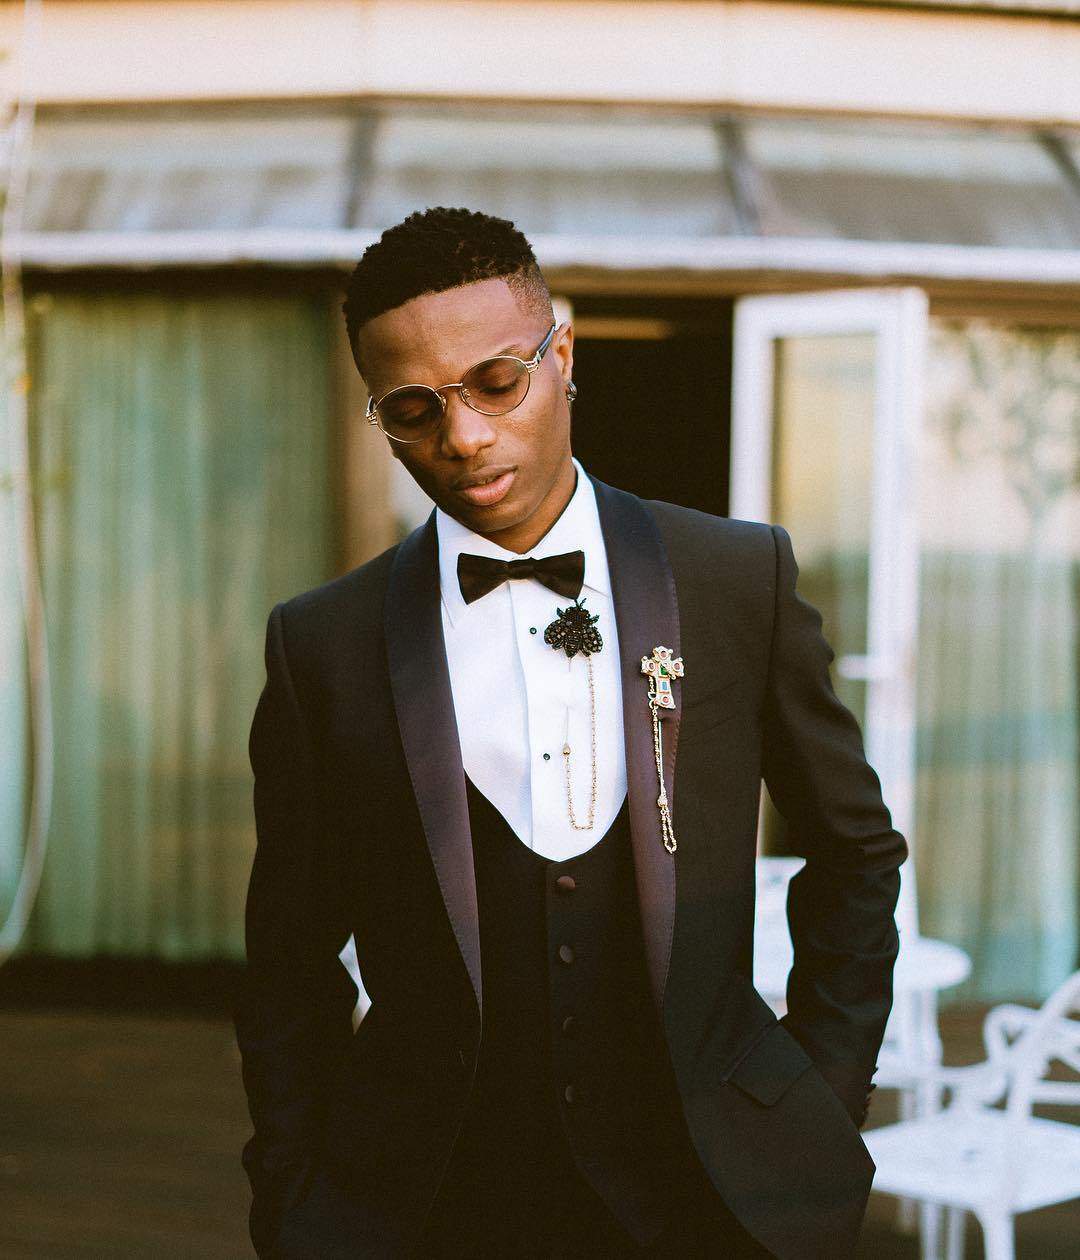 Wizkid to build schools in every African country